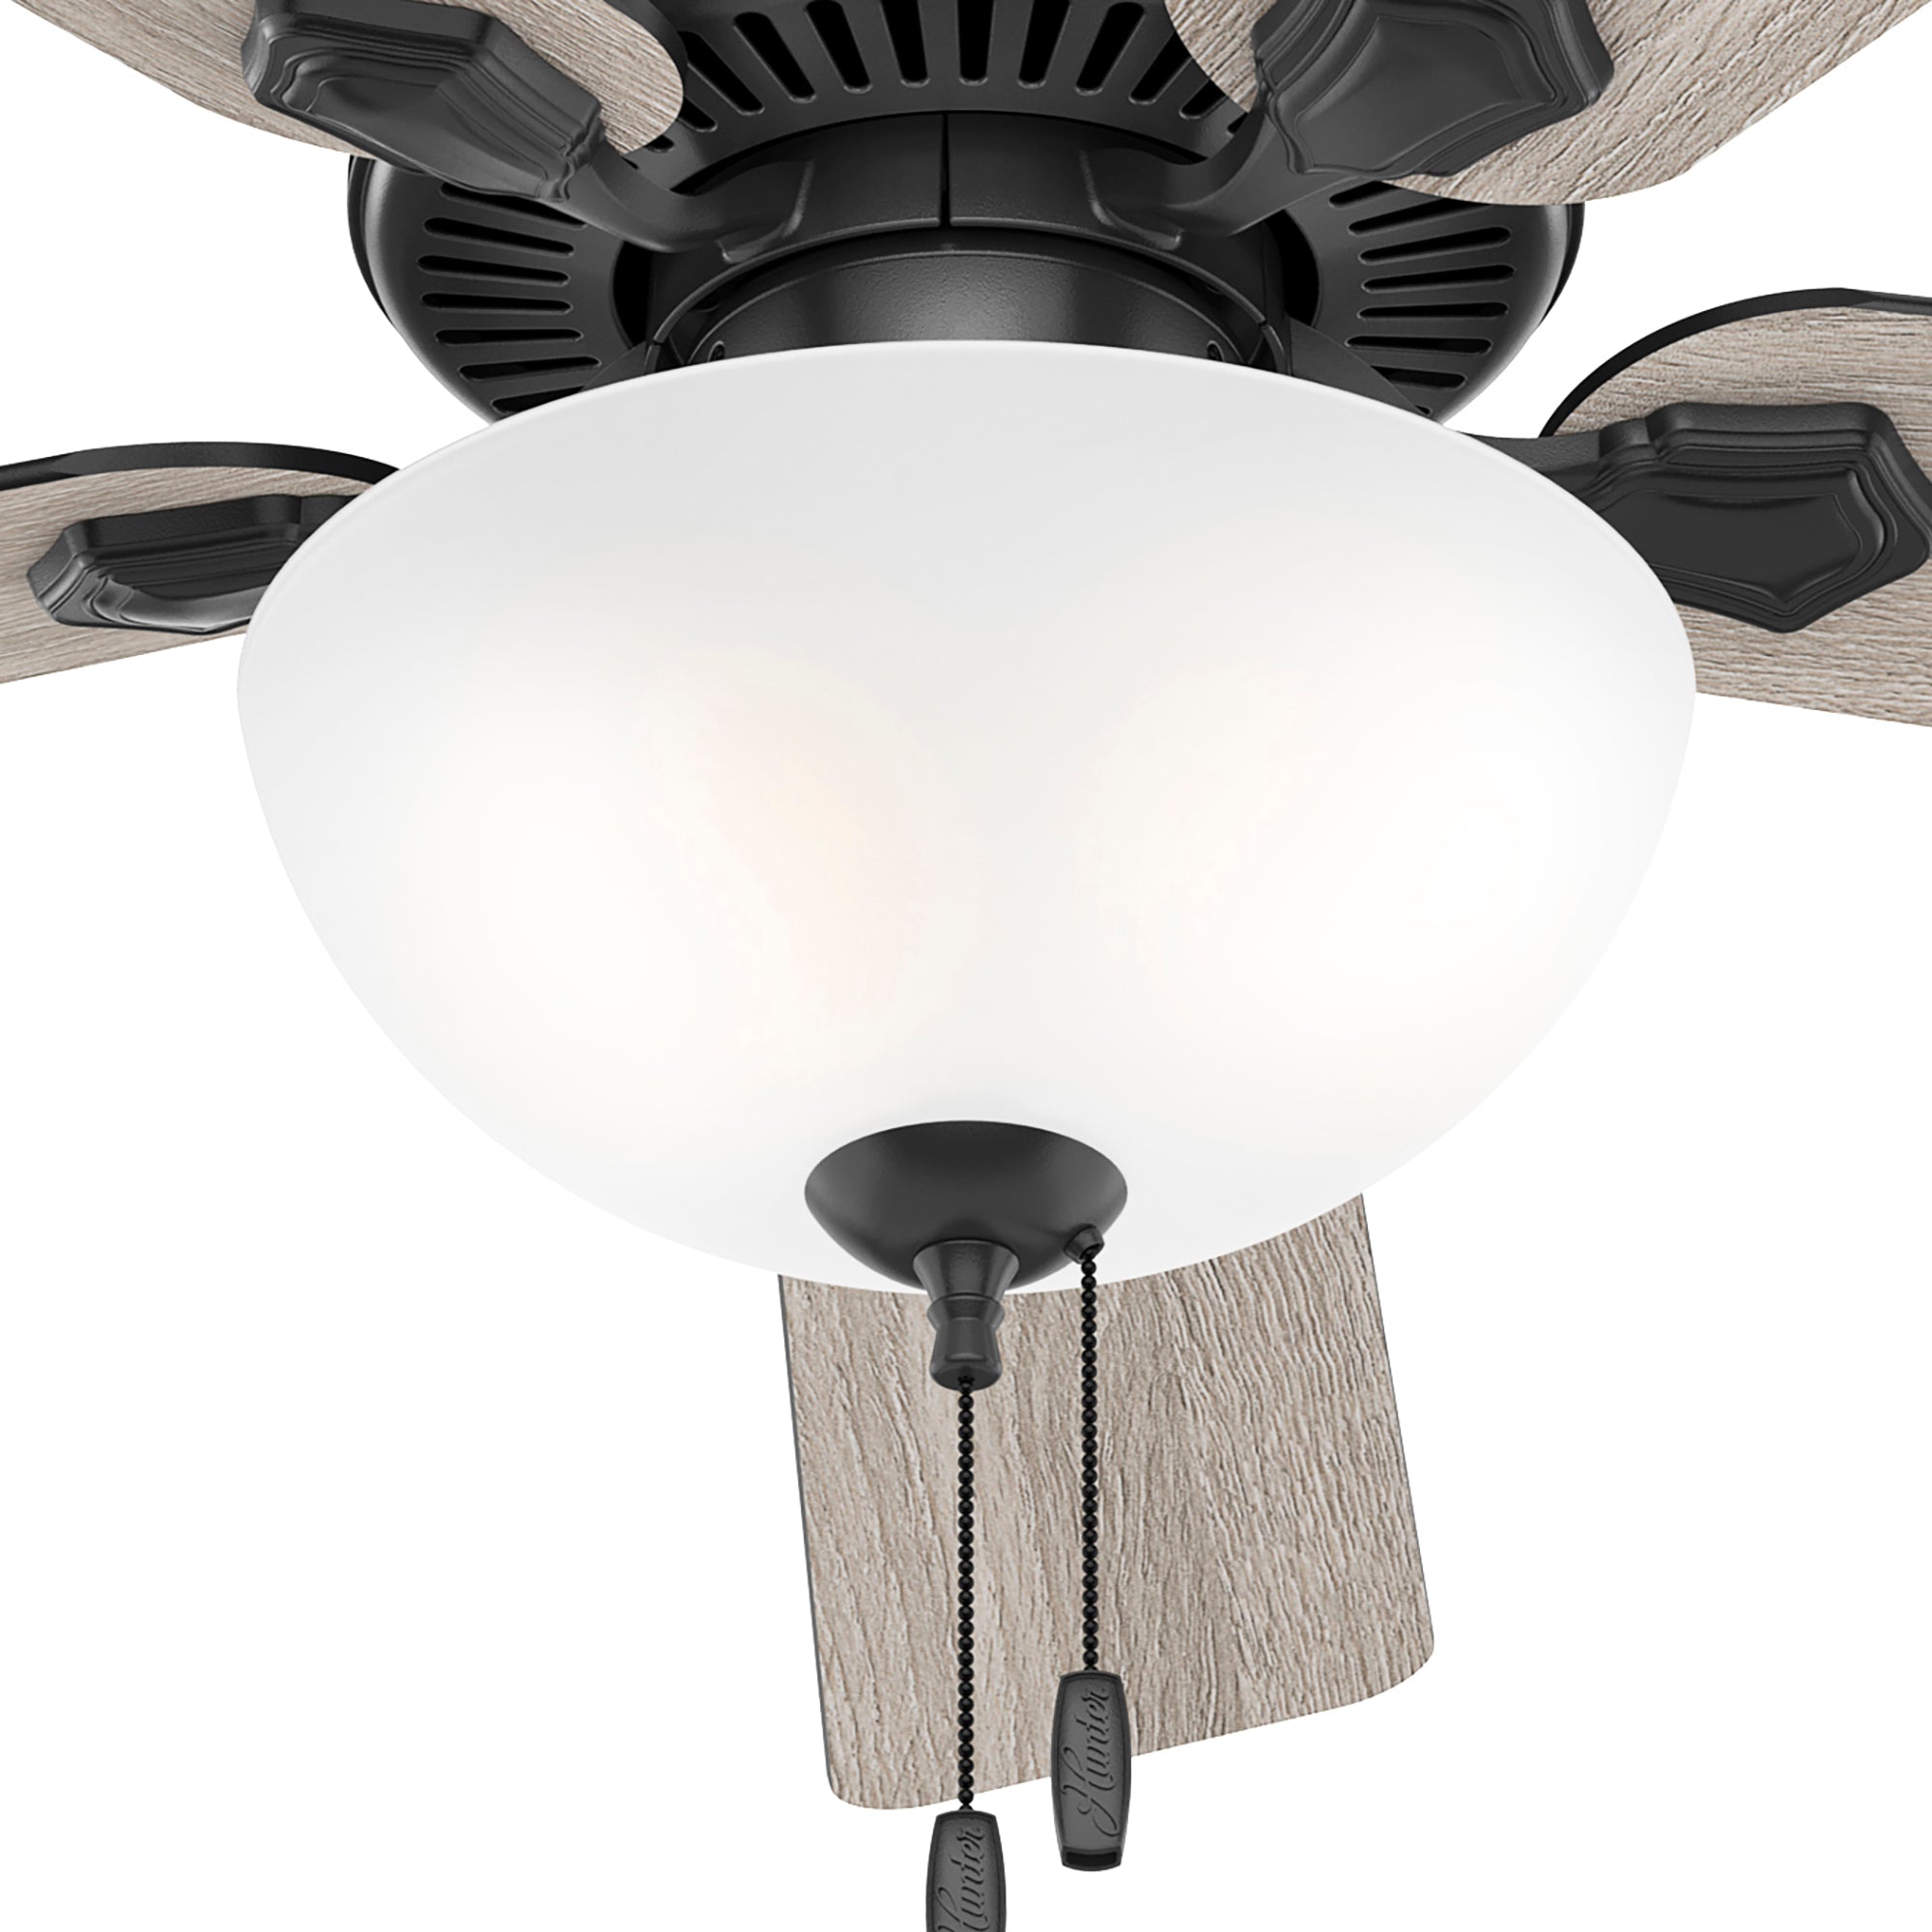 Hunter 52 inch Swanson Ceiling Fan with LED Light Kit and Pull Chain